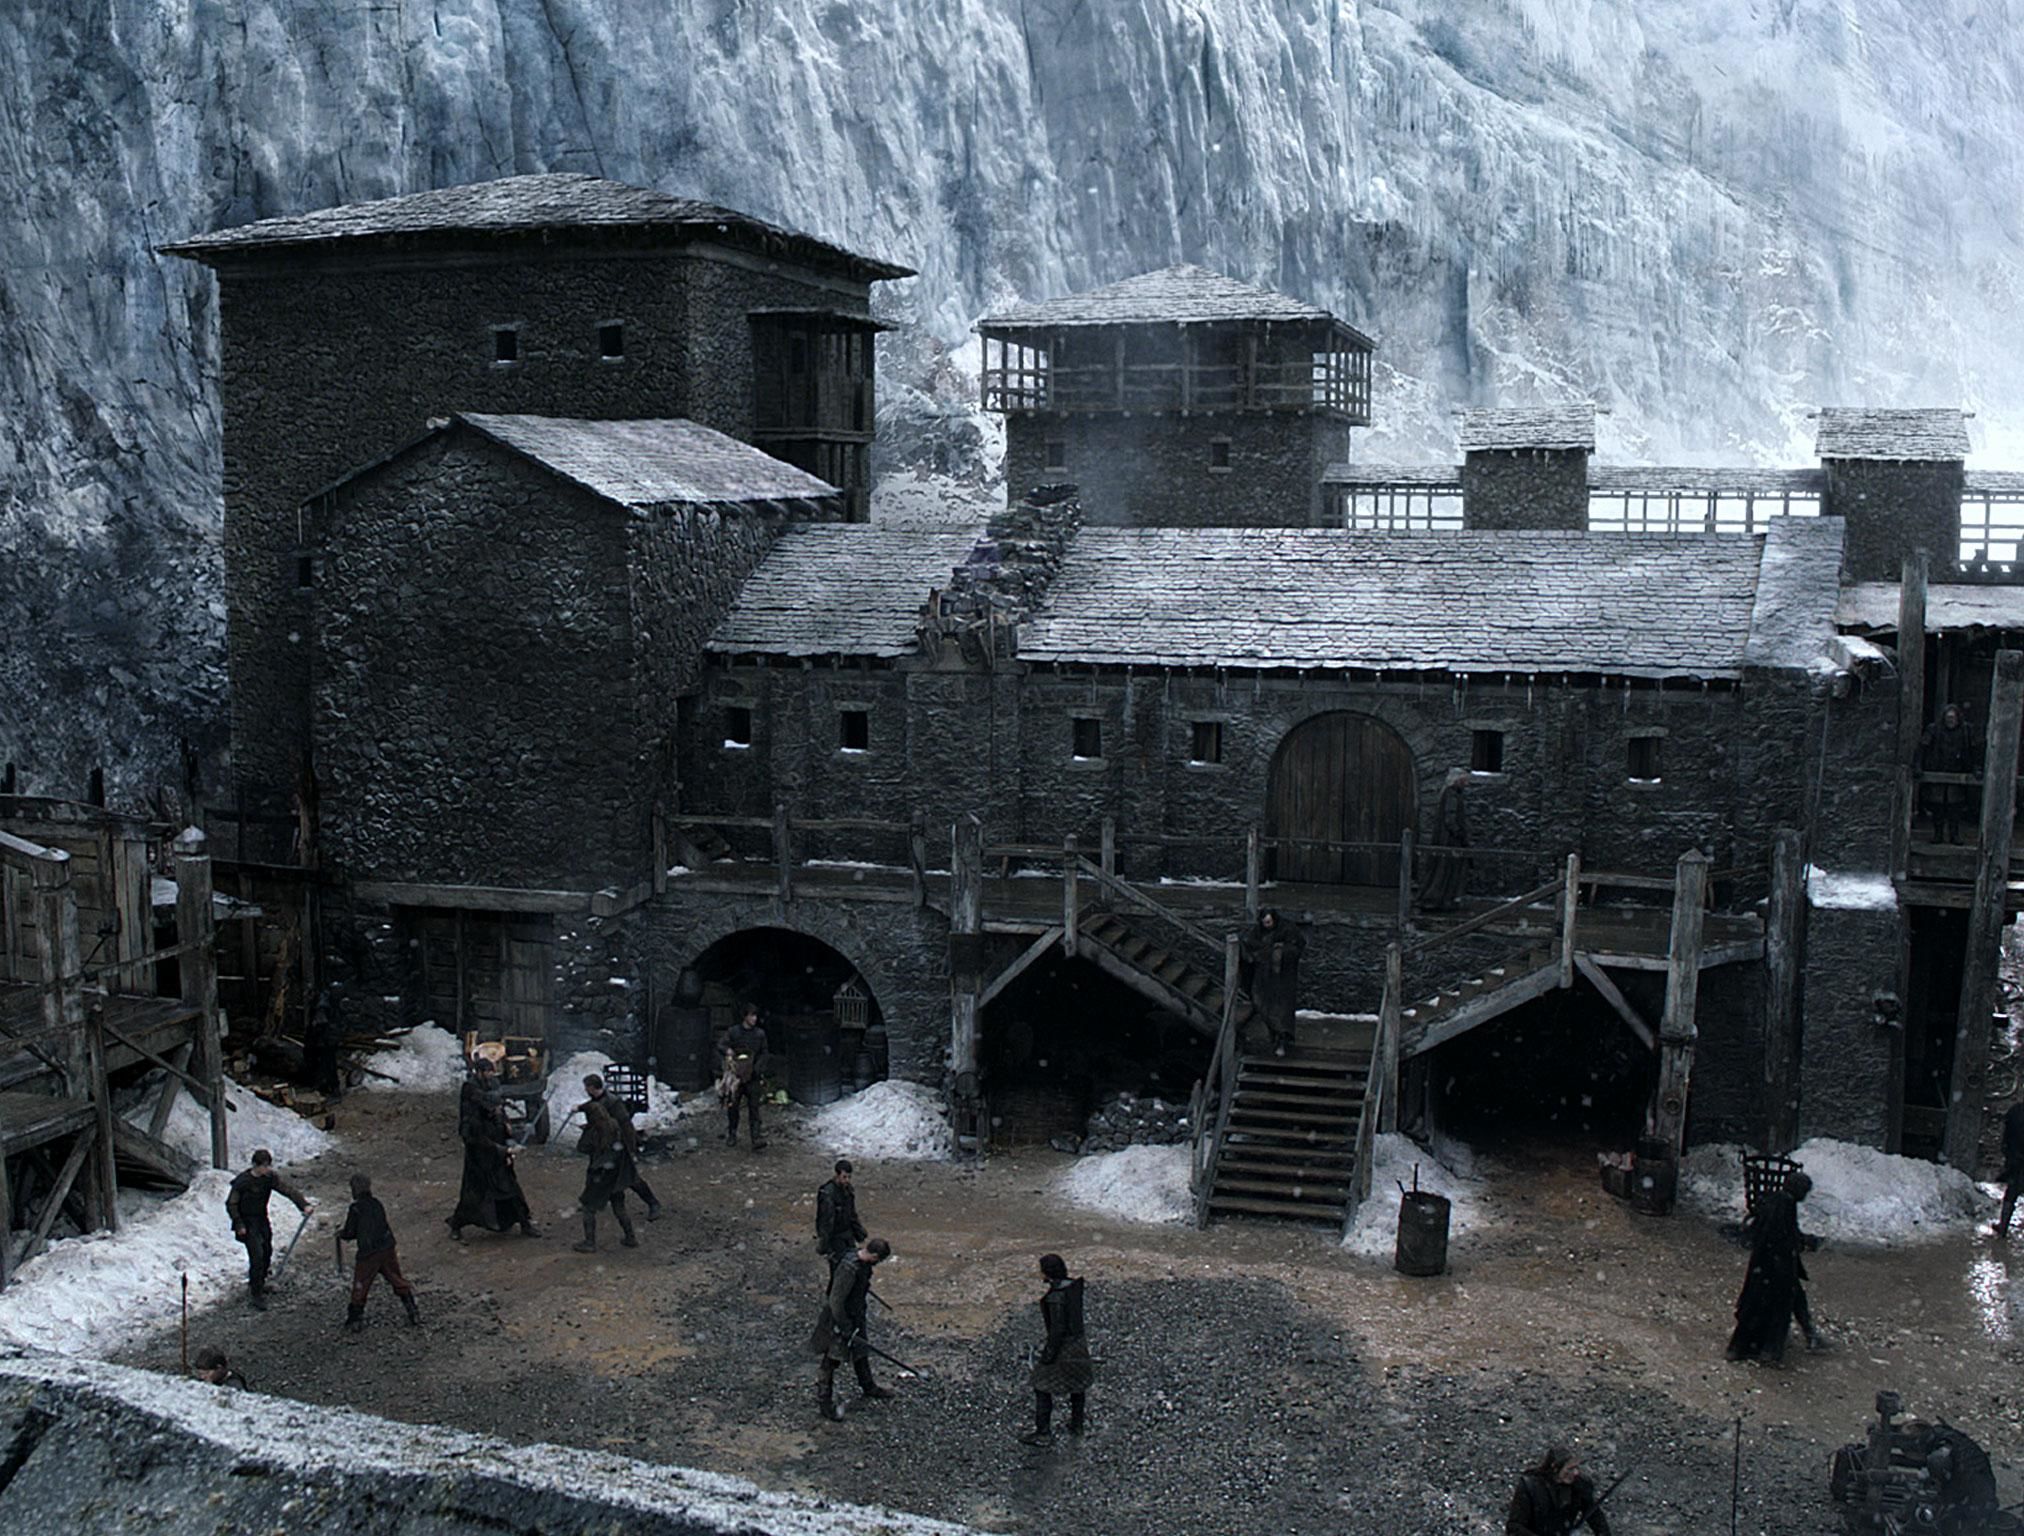 Castle Black guards The Wall in HBO's Game of Thrones